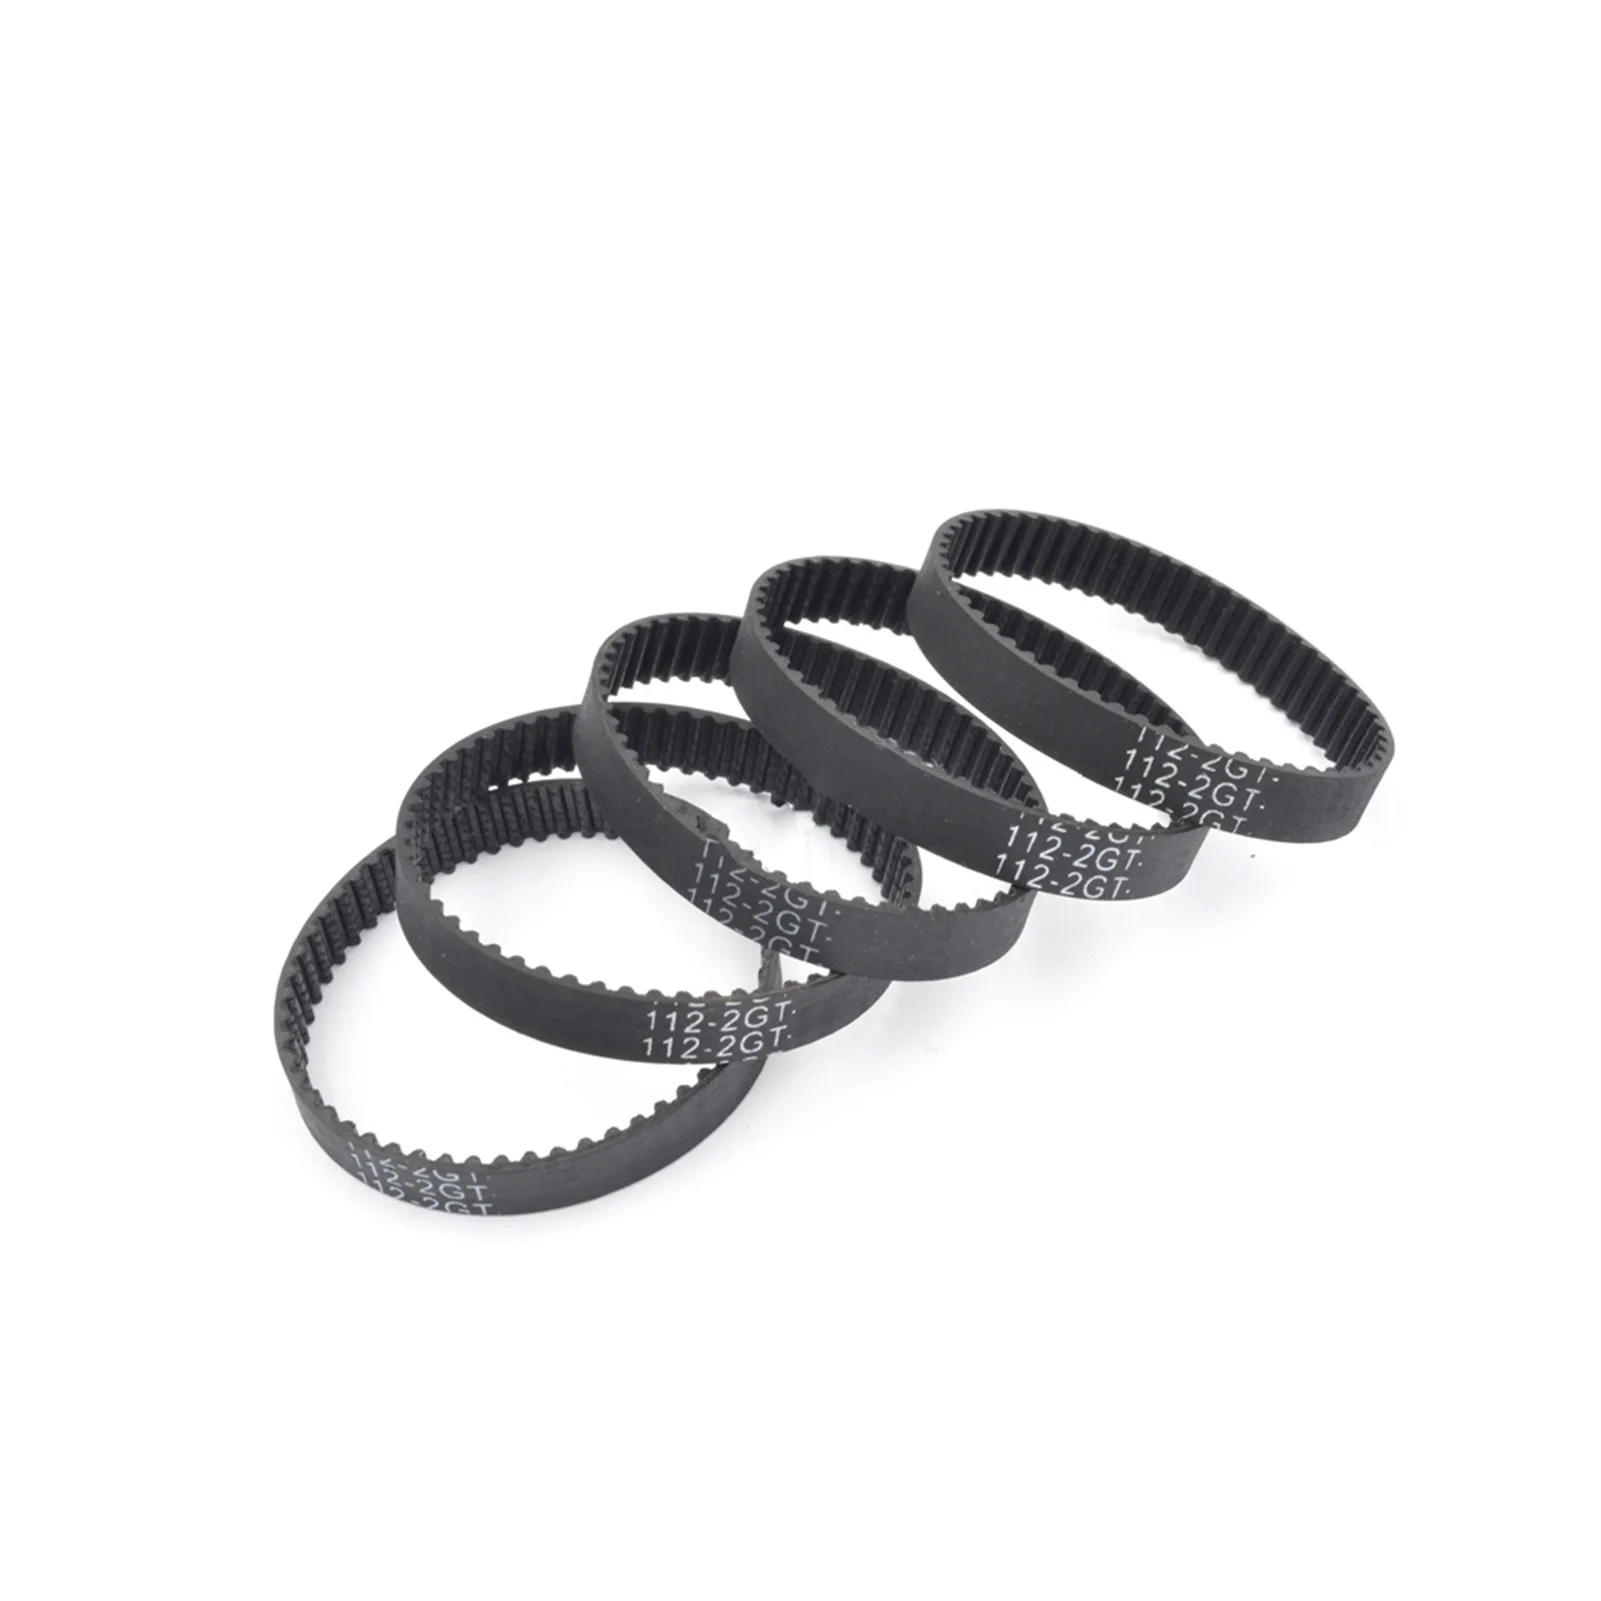 

5pcs GT3 2MGT 2M 2GT Synchronous Timing Belt, Pitch Length 116/118/120/122/124, Width 6mm/9mm, Teeth 58/59/60/61/62, in